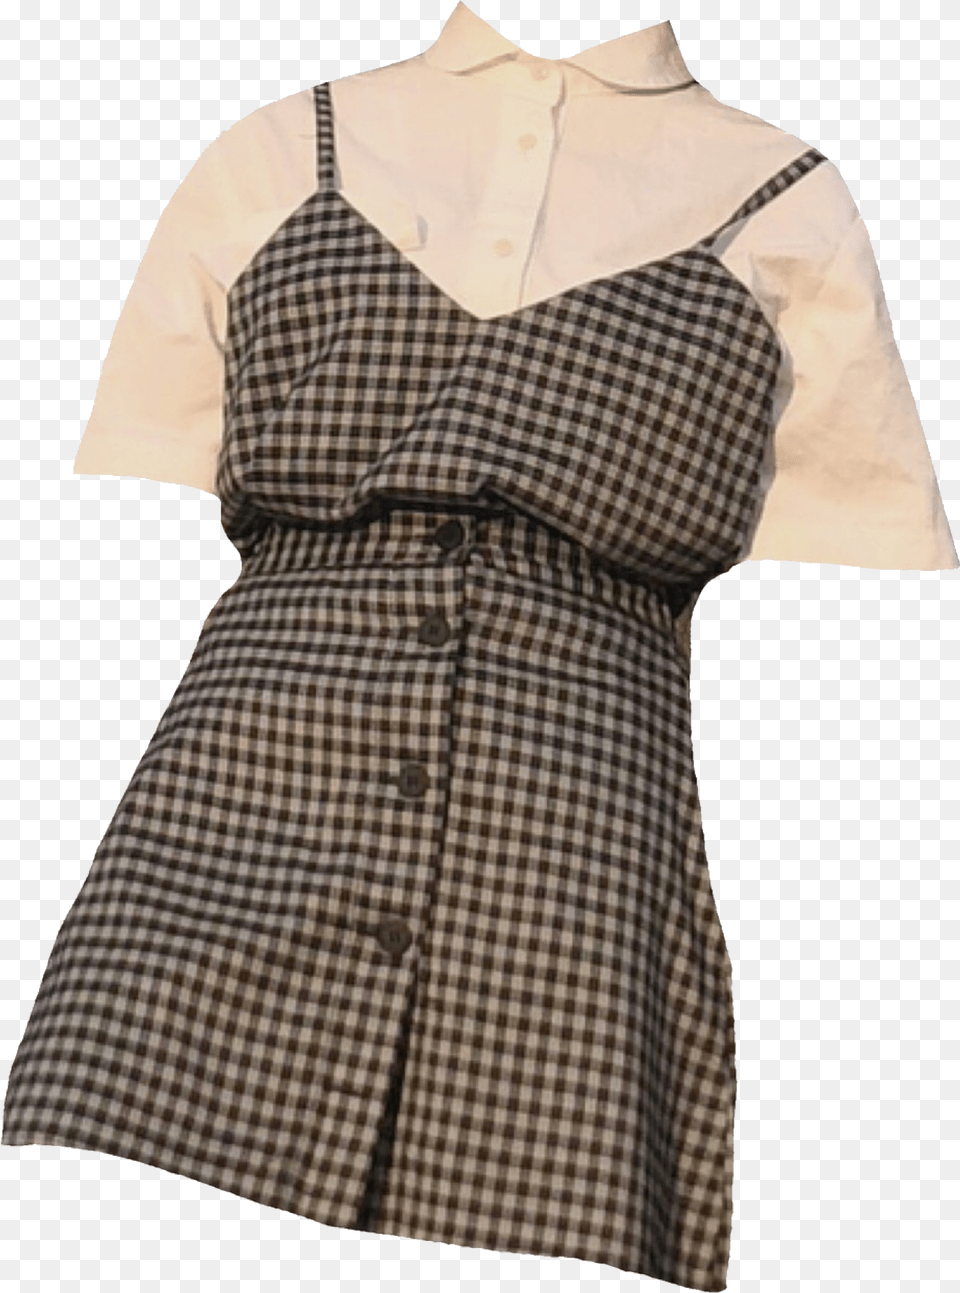 Nymphet Outfit, Blouse, Clothing, Dress, Shirt Png